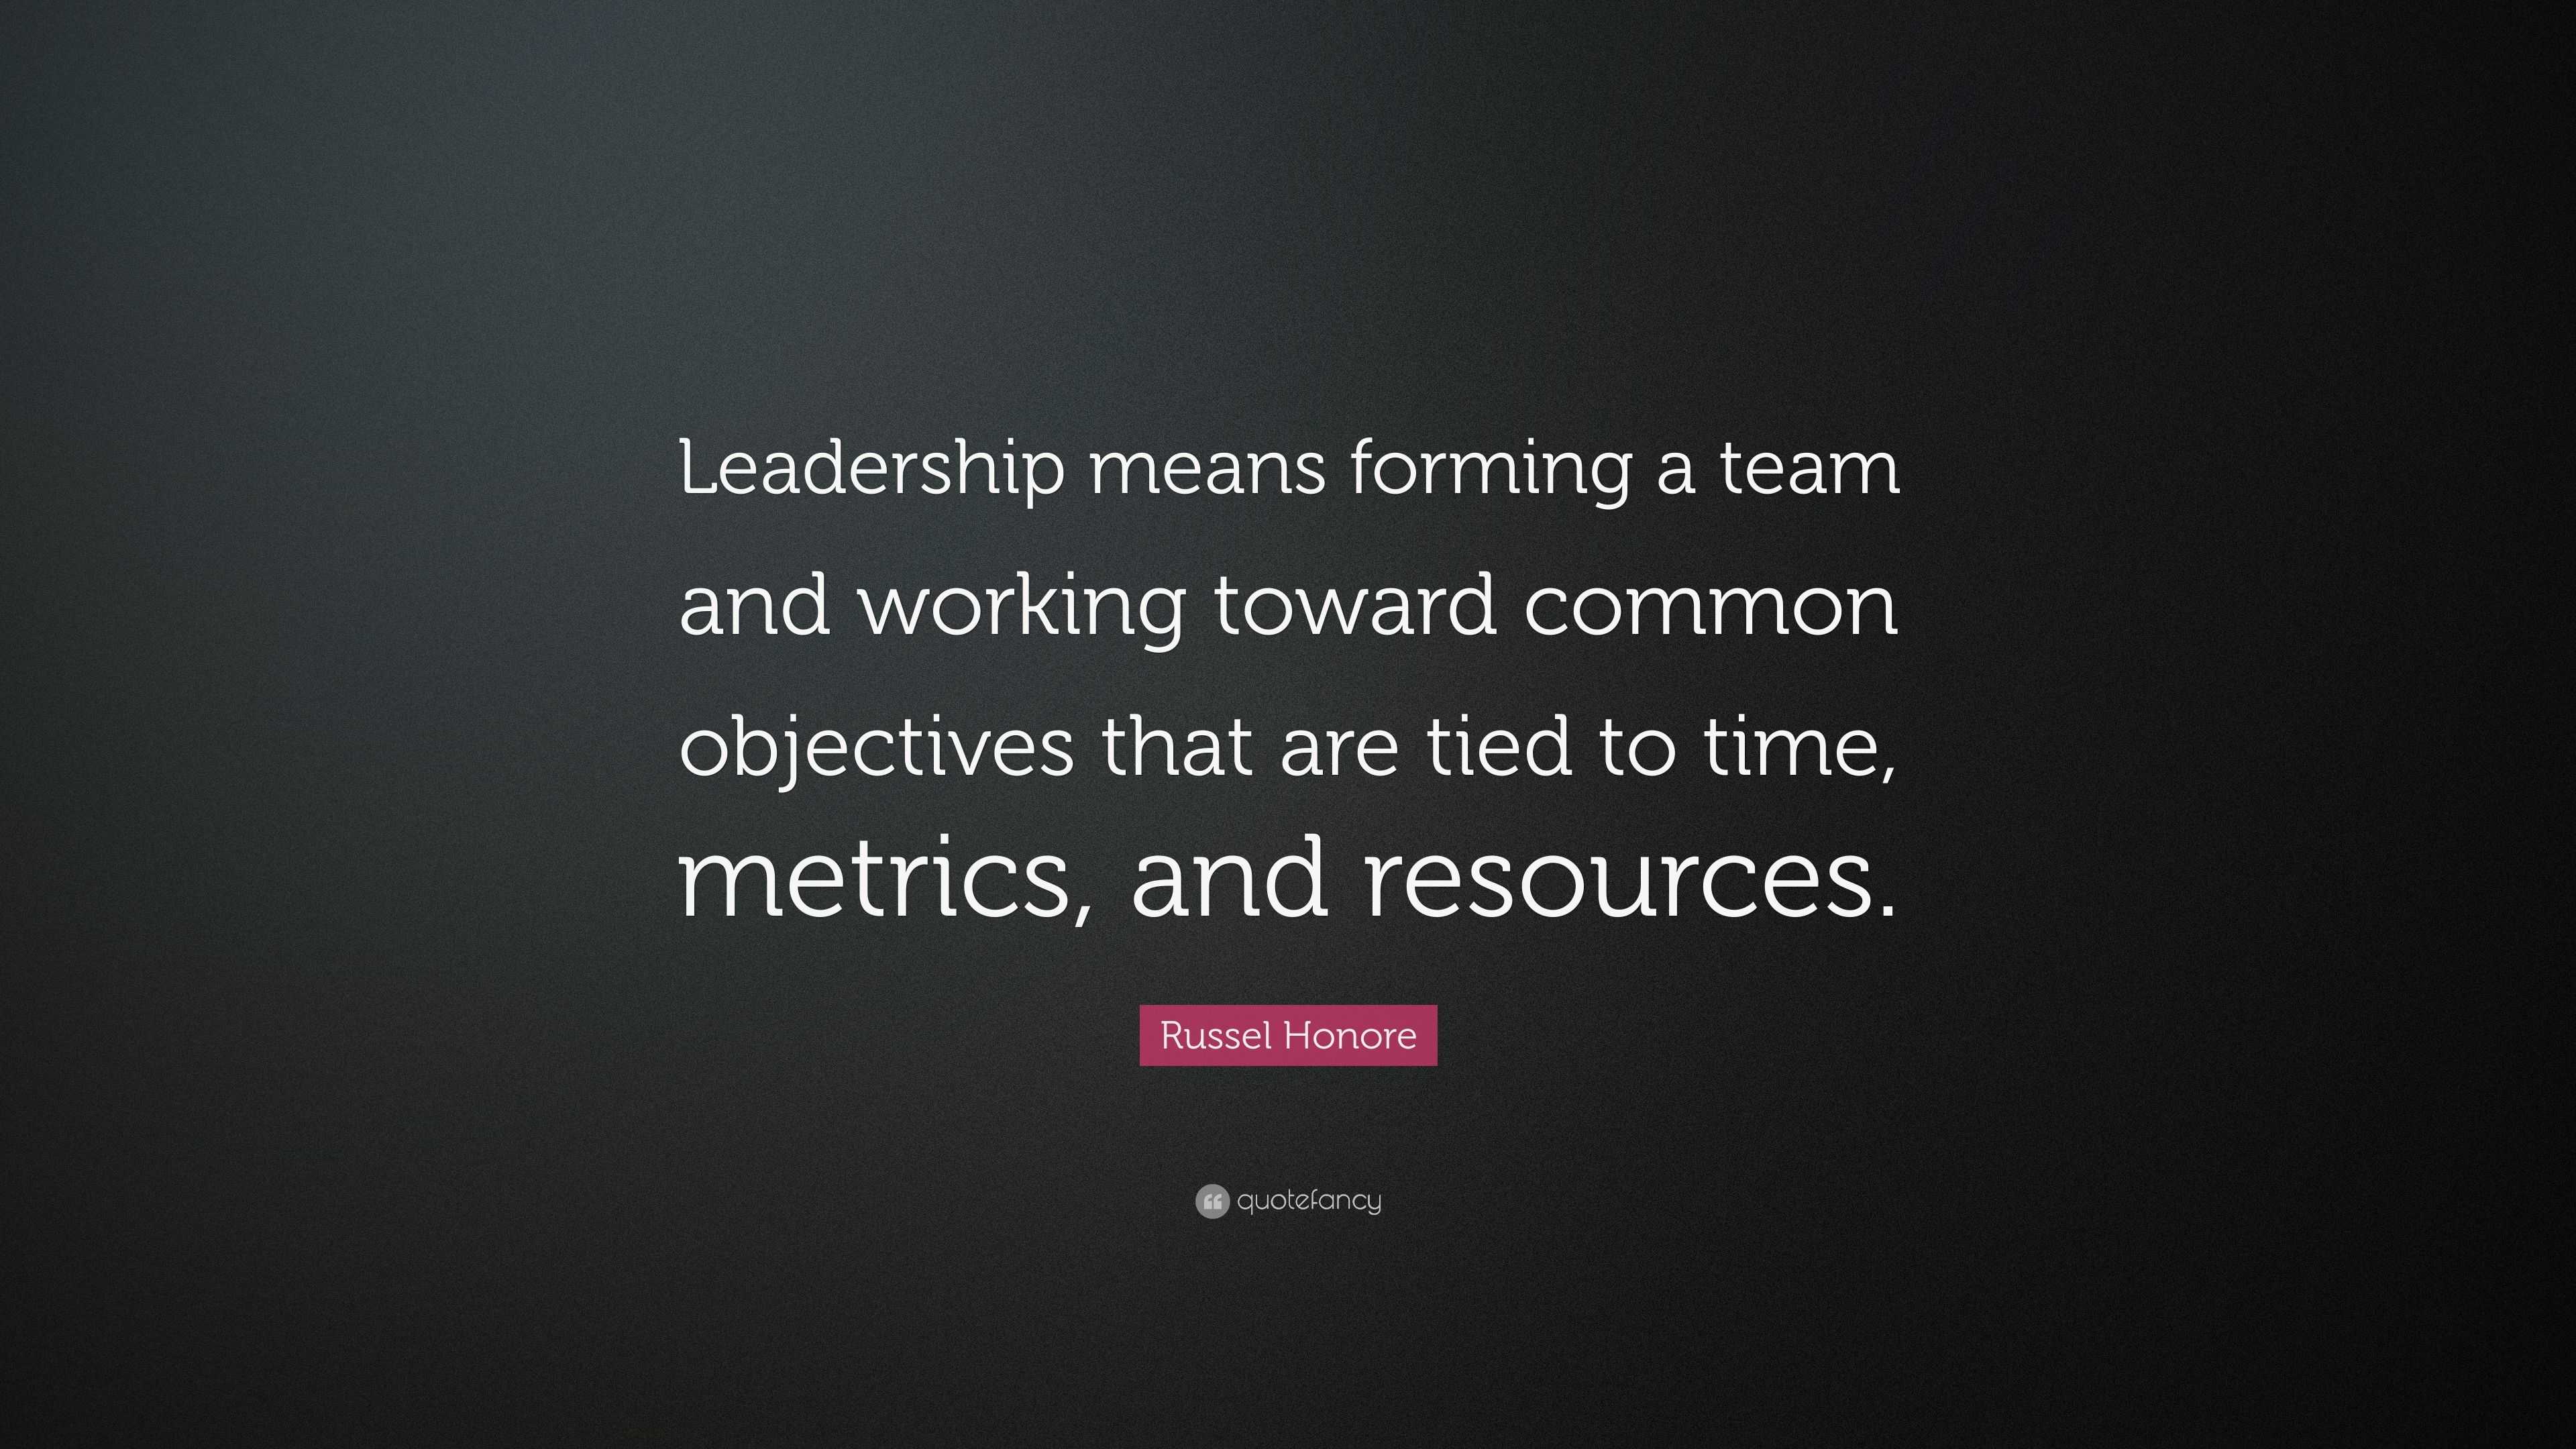 Russel Honore Quote: “Leadership means forming a team and working